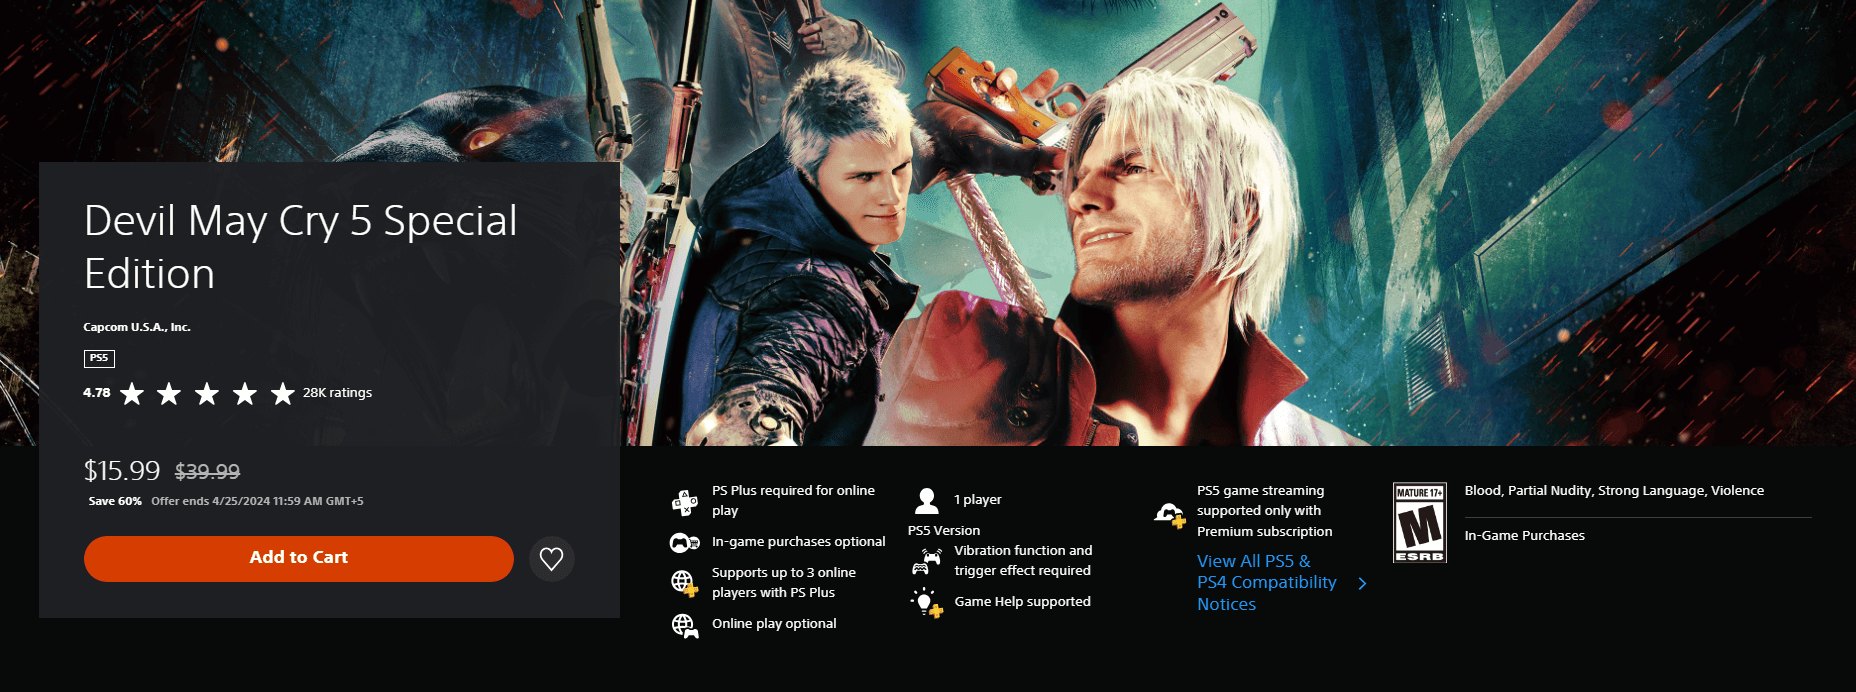 DMC 5 Special Edition on the PlayStation Store